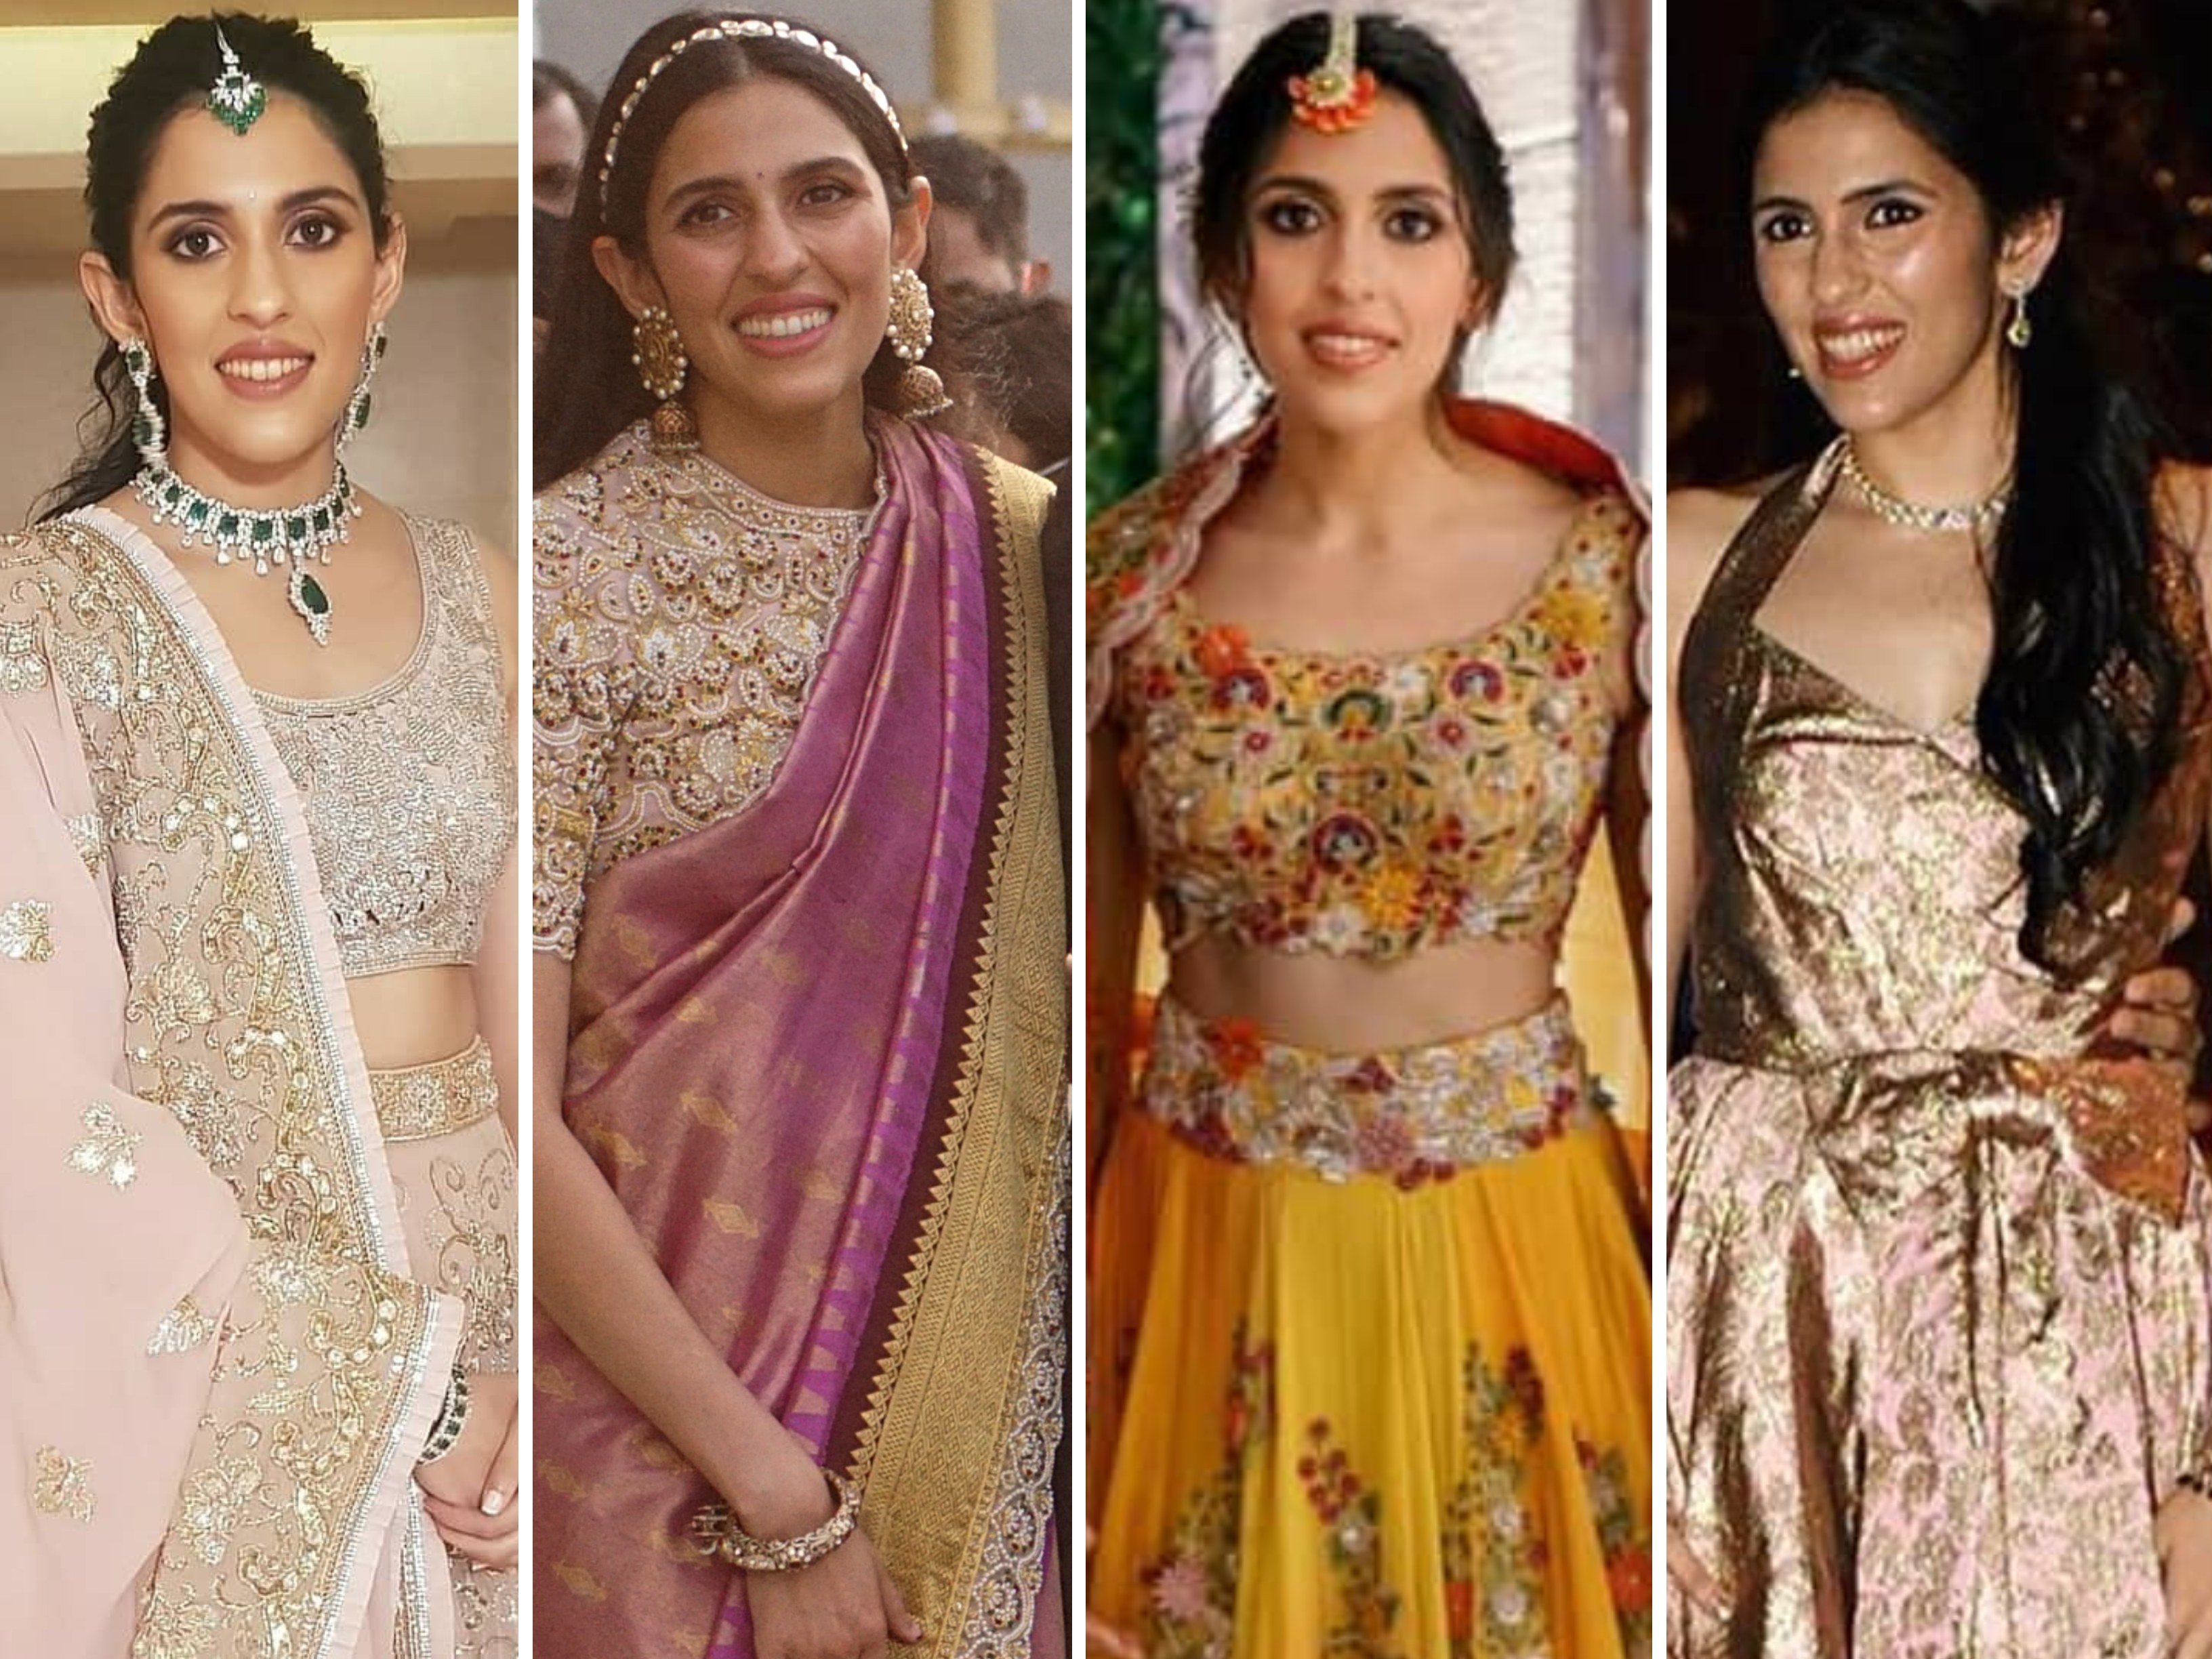 Shloka Mehta, wife of billionaire heir Akash Ambani, is a style icon in India and loves wearing traditional outfits that showcase her roots and culture. Photos: @anamikakhanna.in, @shloka_mehta_official/Instagram; Getty Images; @shlokaakashambani_fp/Instagram